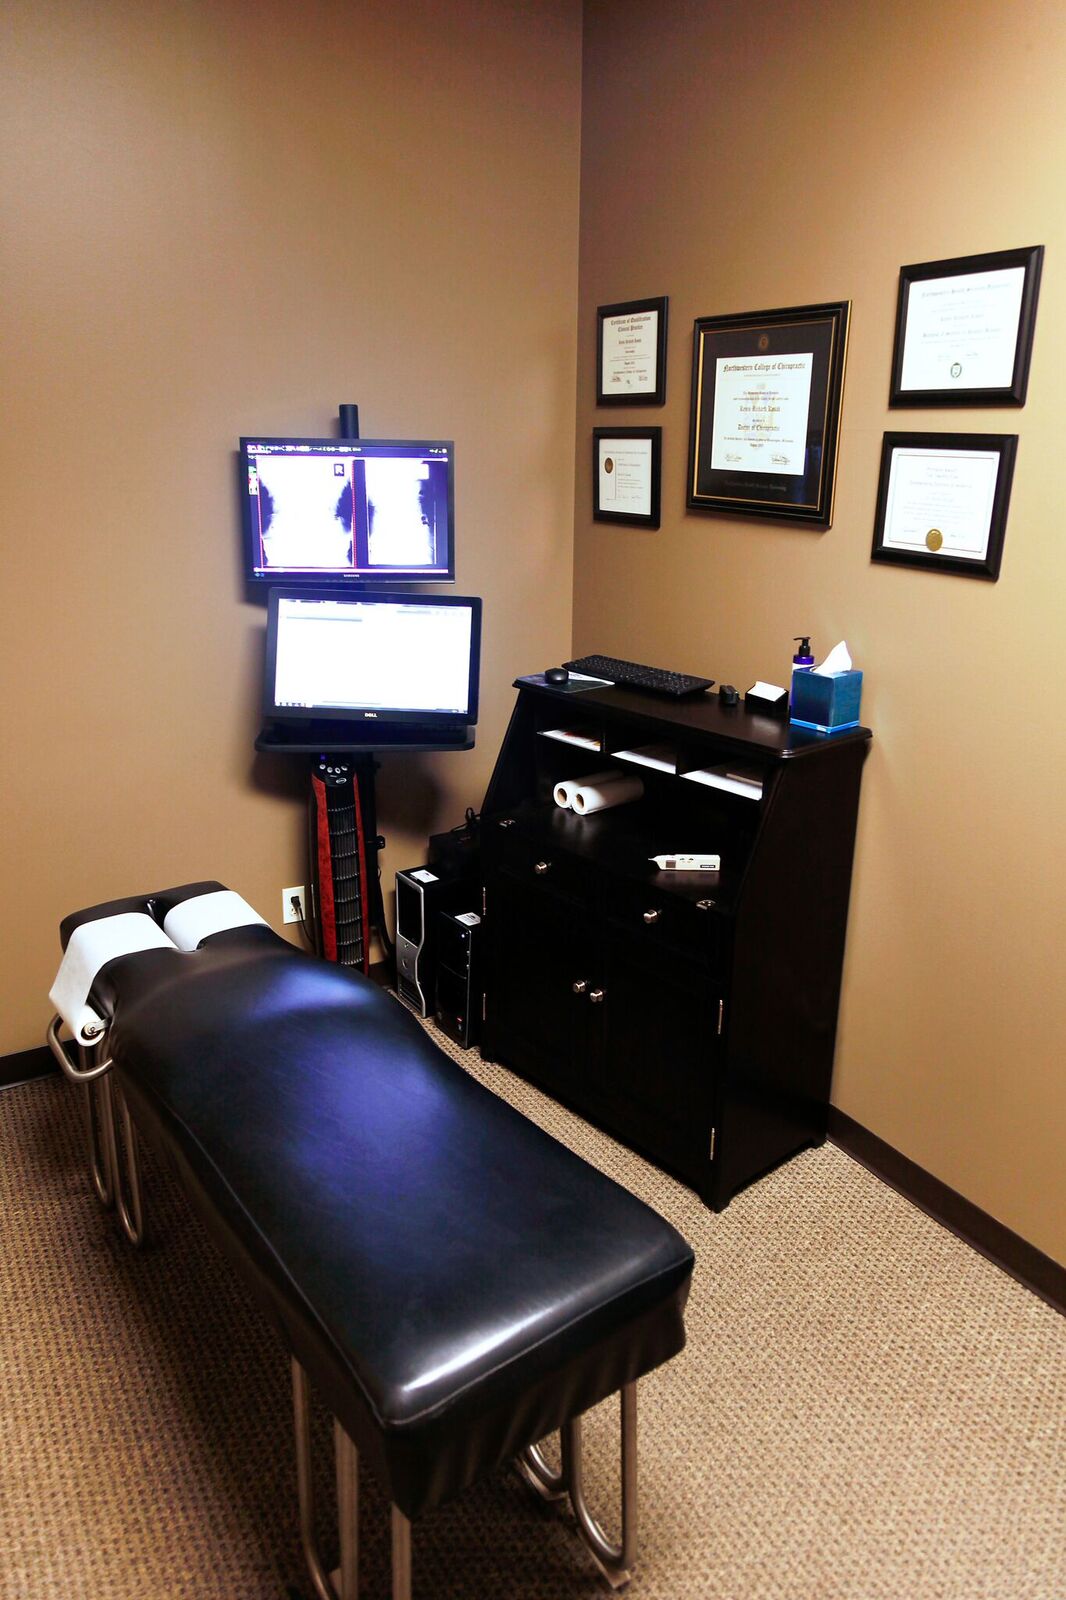 Treatments and services at Kosak chiropractic in omaha